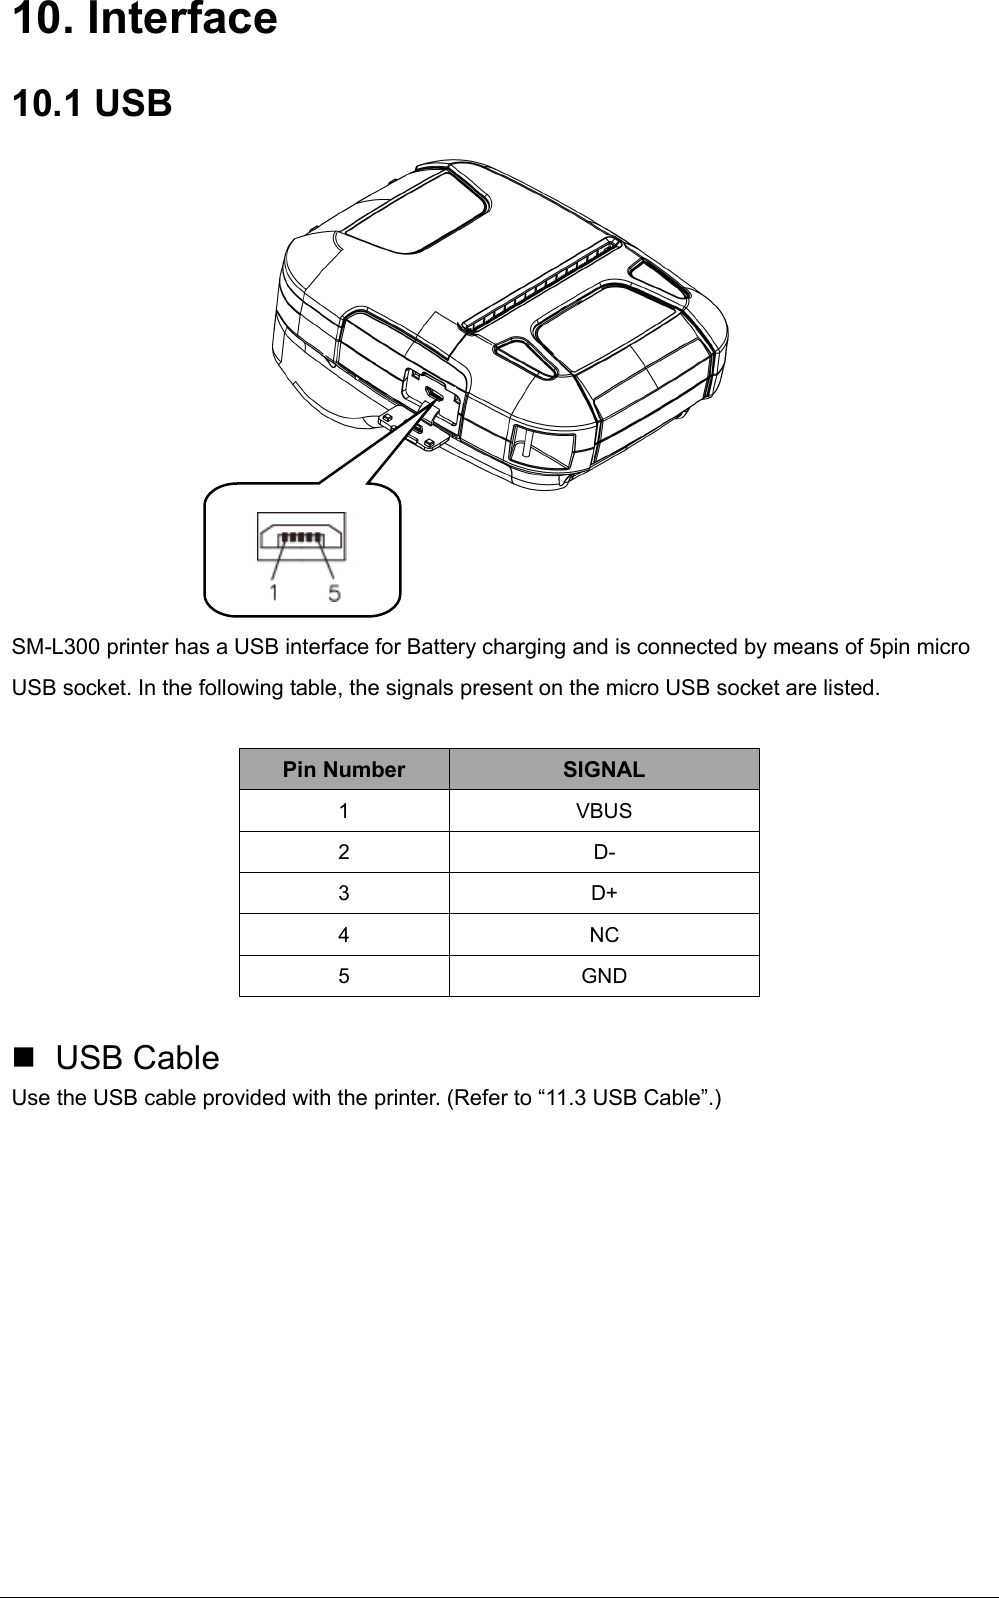   10. Interface 10.1 USB     SM-L300 printer has a USB interface for Battery charging and is connected by means of 5pin micro USB socket. In the following table, the signals present on the micro USB socket are listed.  Pin Number  SIGNAL 1  VBUS 2  D- 3  D+  4  NC 5  GND    USB Cable Use the USB cable provided with the printer. (Refer to “11.3 USB Cable”.)          